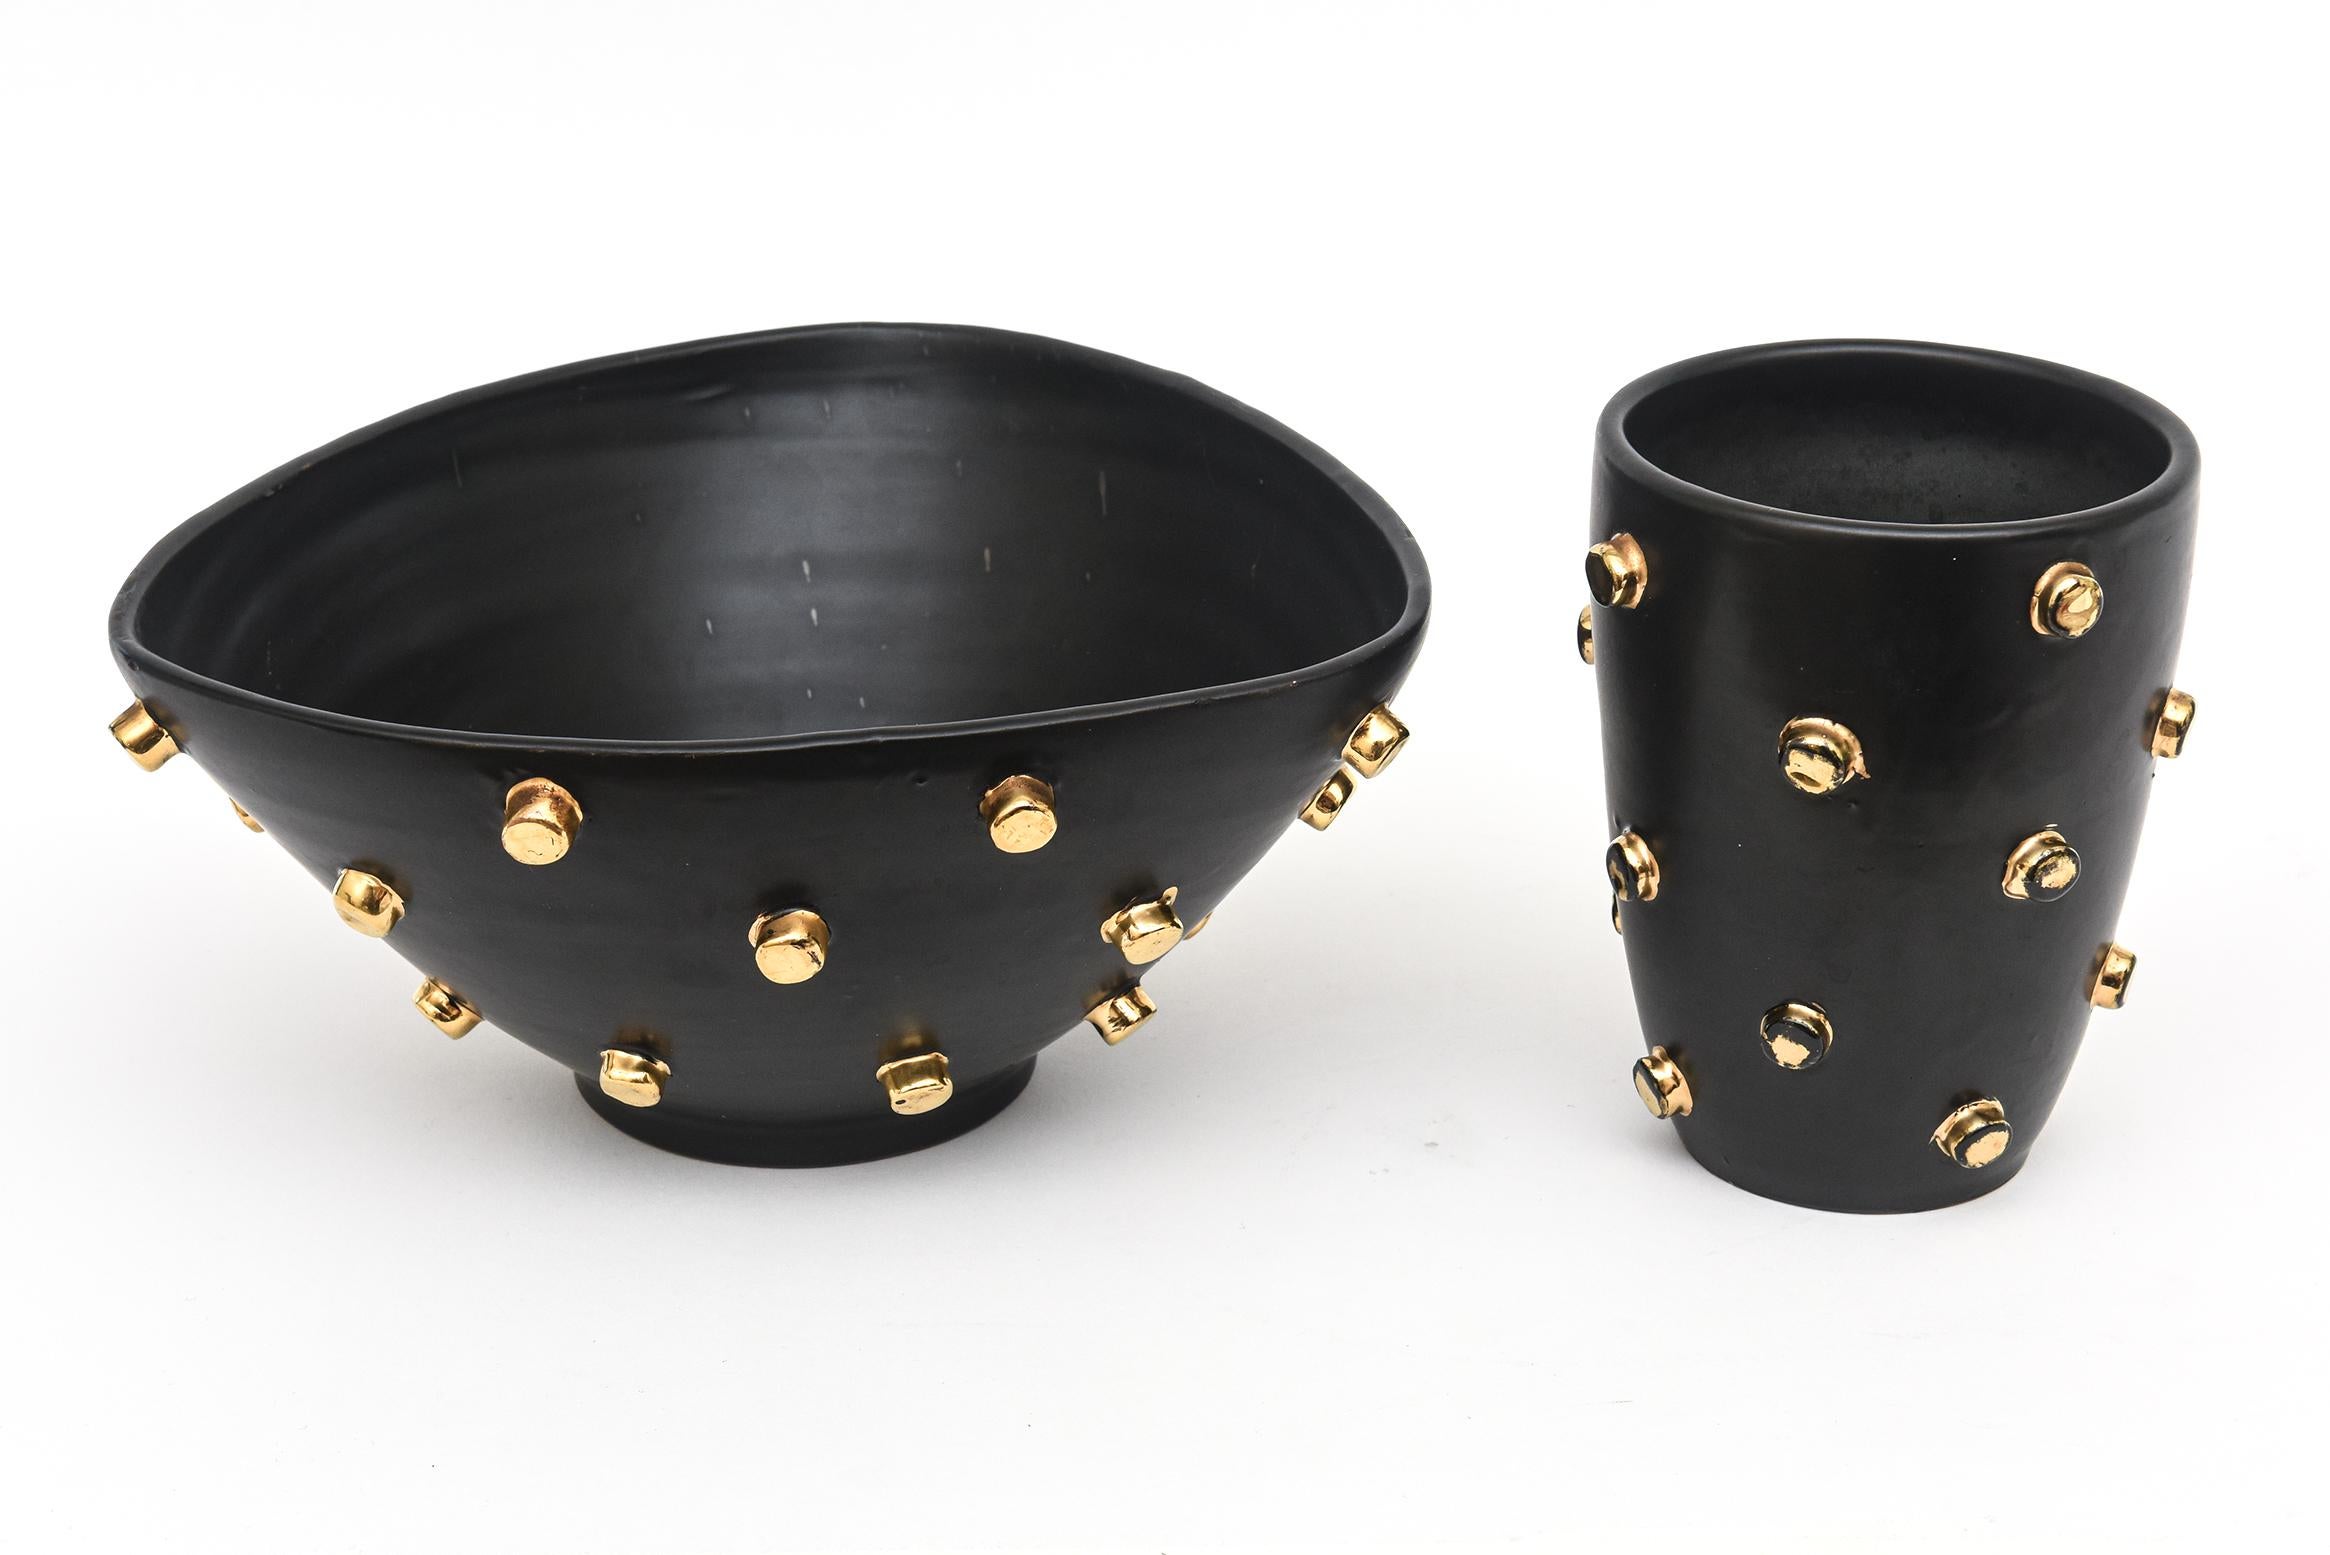 Alvino Bagni for Bitossi designed this pair of outstanding rare vintage black Italian ceramics in the 60's for Good Friends which was an American importer and often commissioned Bitossi to produce unusual pieces. This pair consists of a large bowl